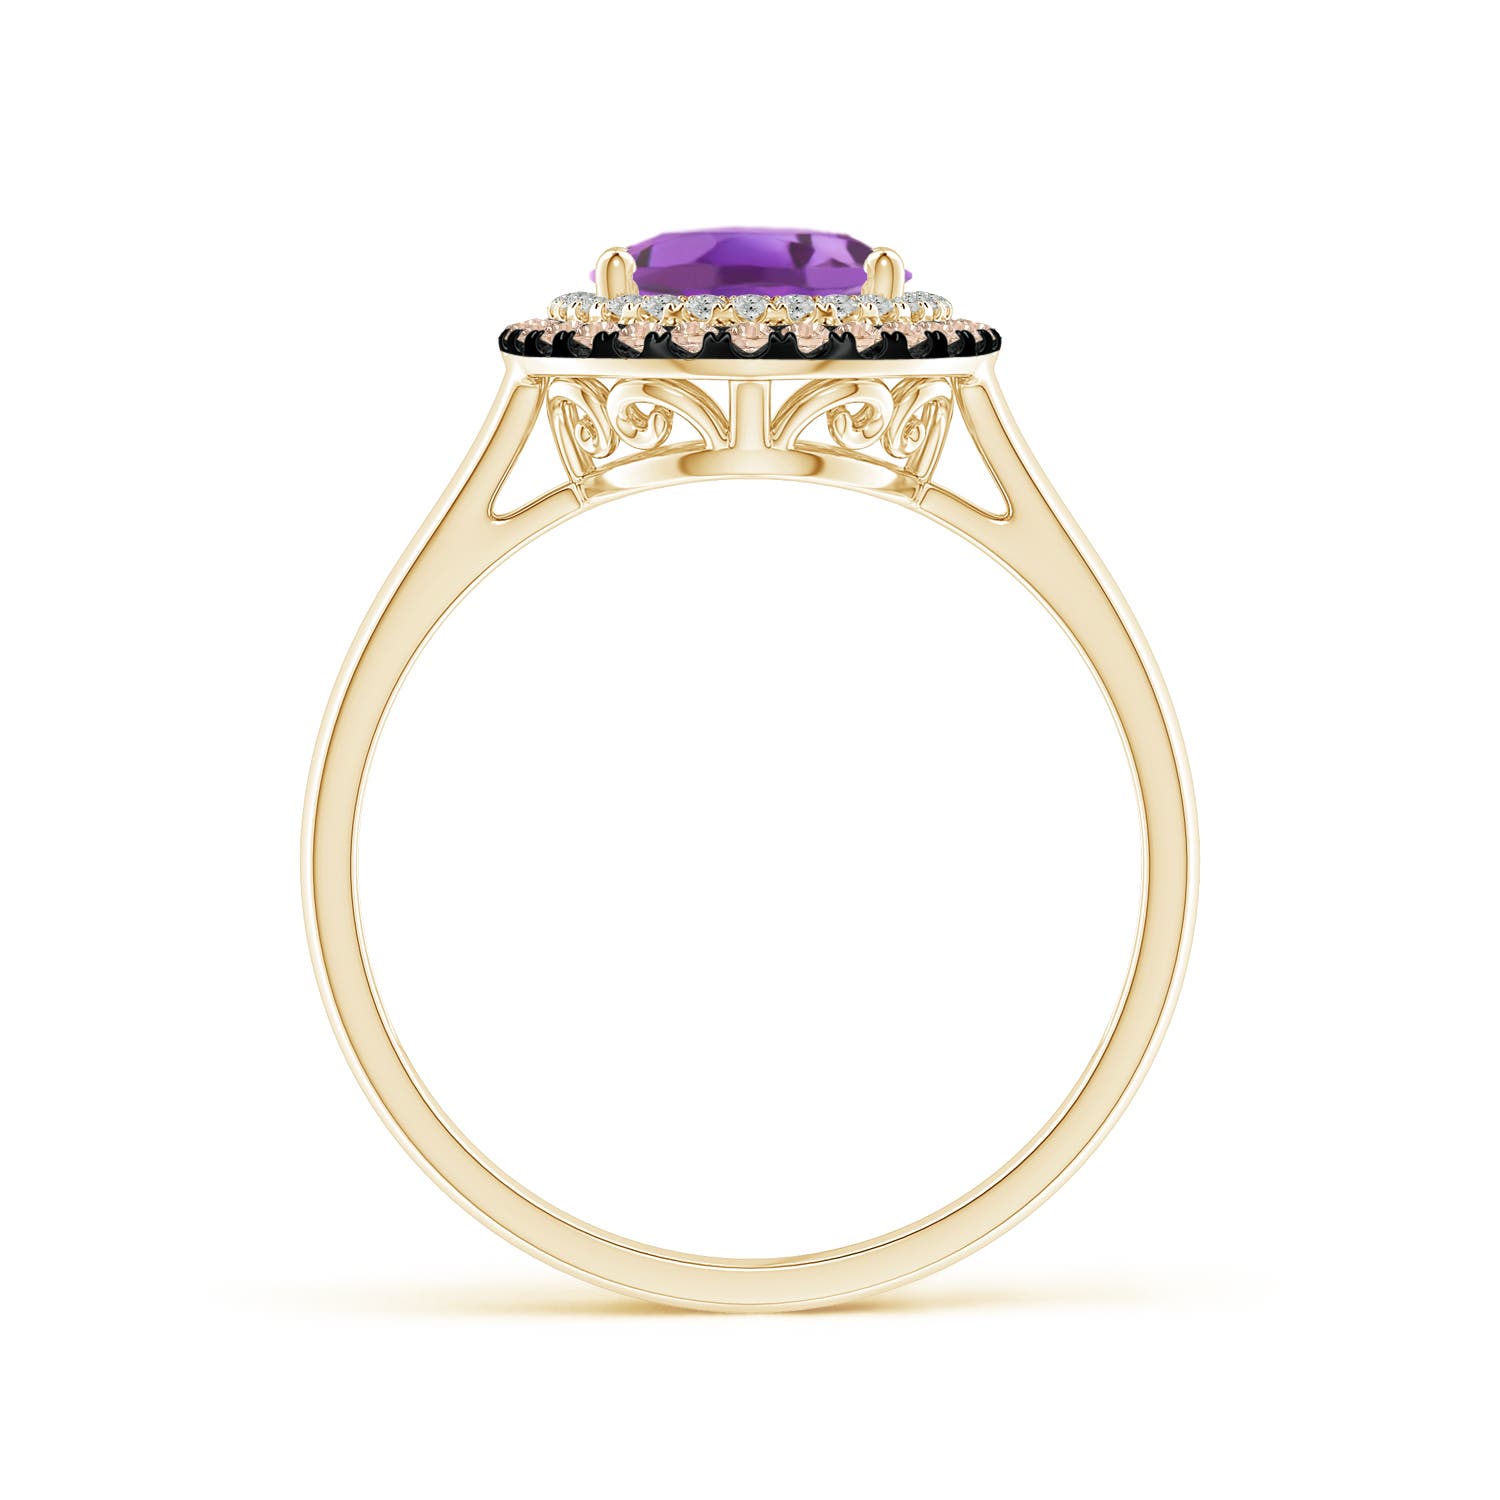 A - Amethyst / 1.87 CT / 14 KT Yellow Gold